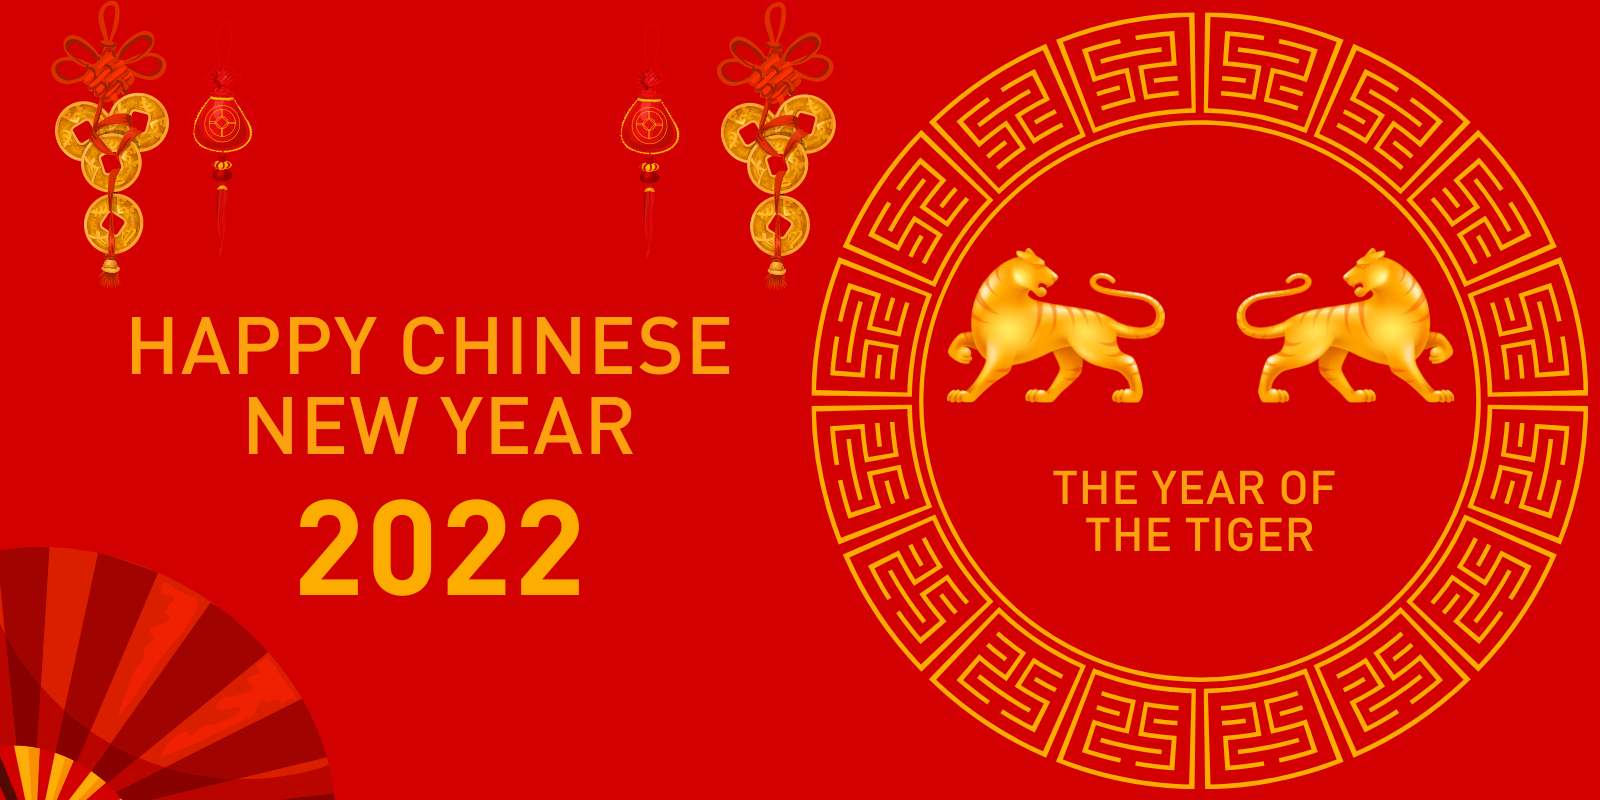 Chinese New Year 2022 – The year of the Tiger - TTC wetranslate